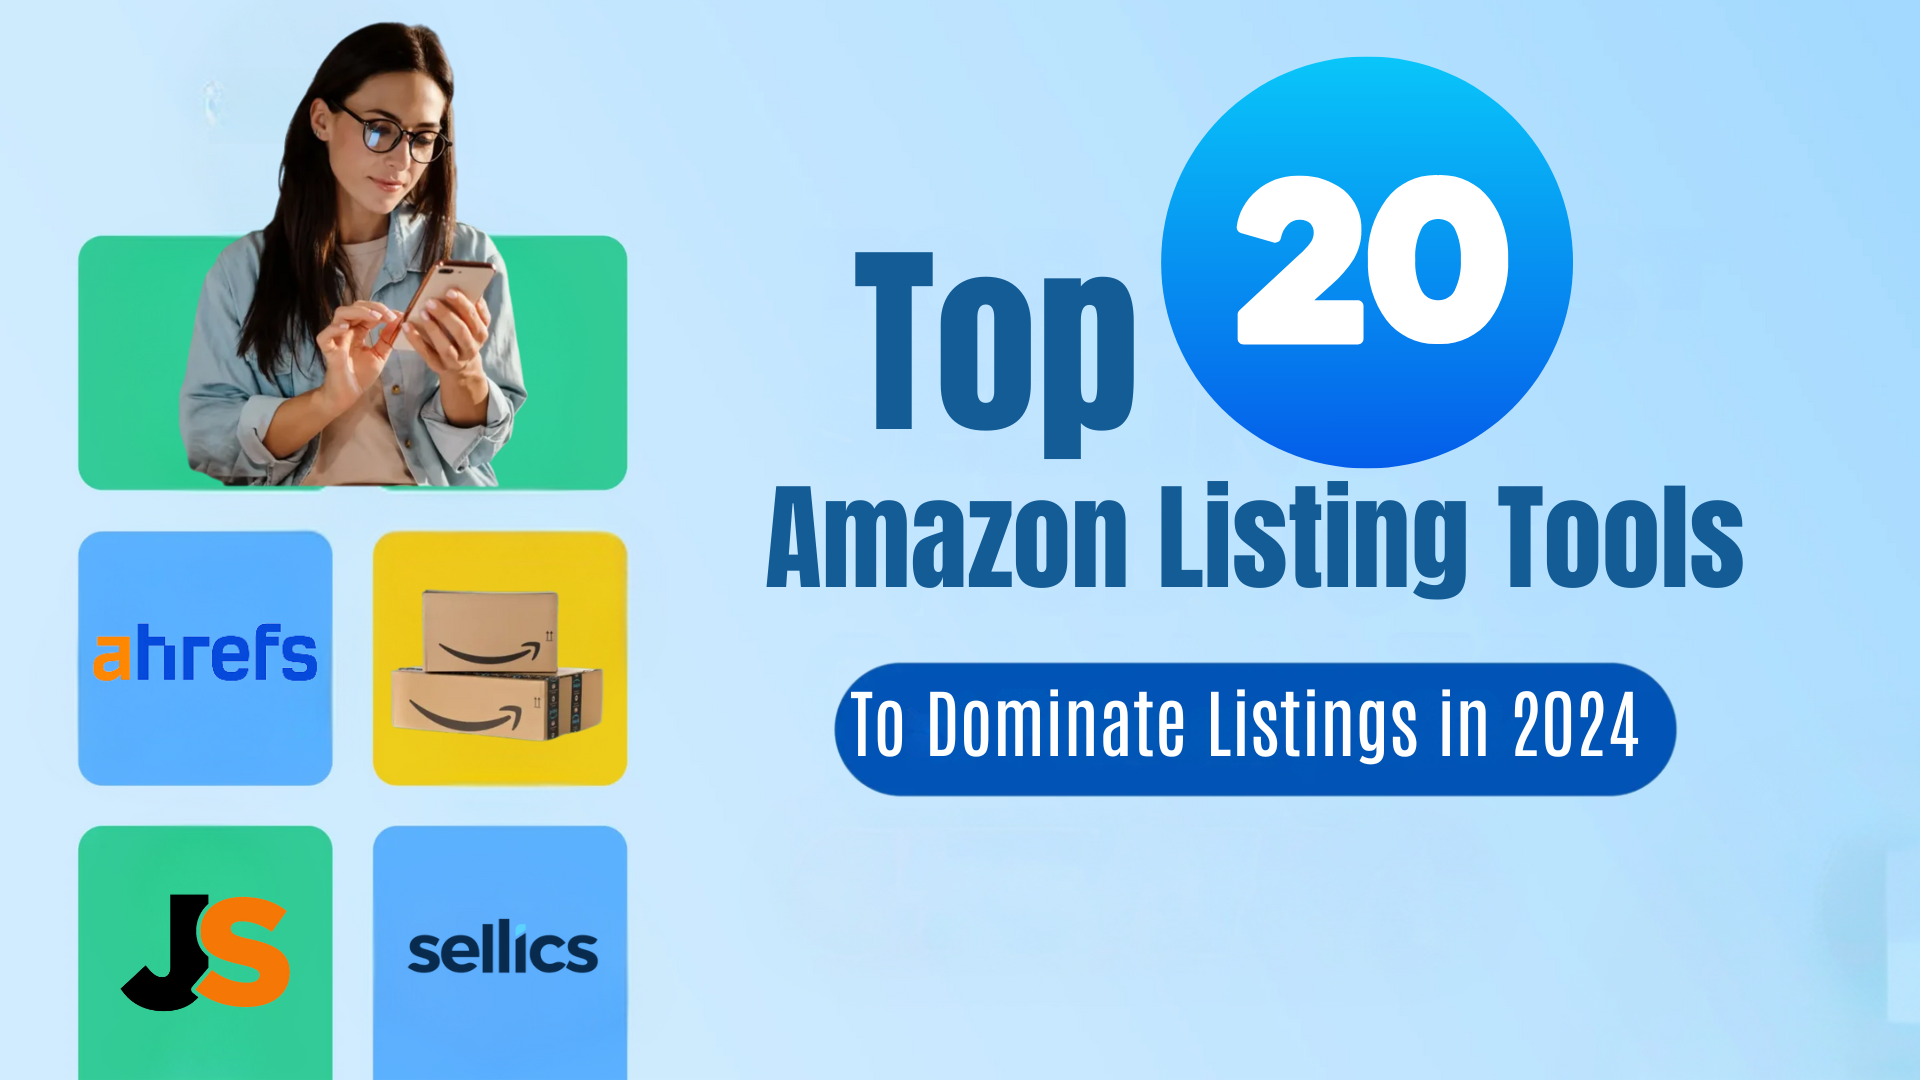 Top 20 Amazon Listing Tools To Dominate Listings in 2024